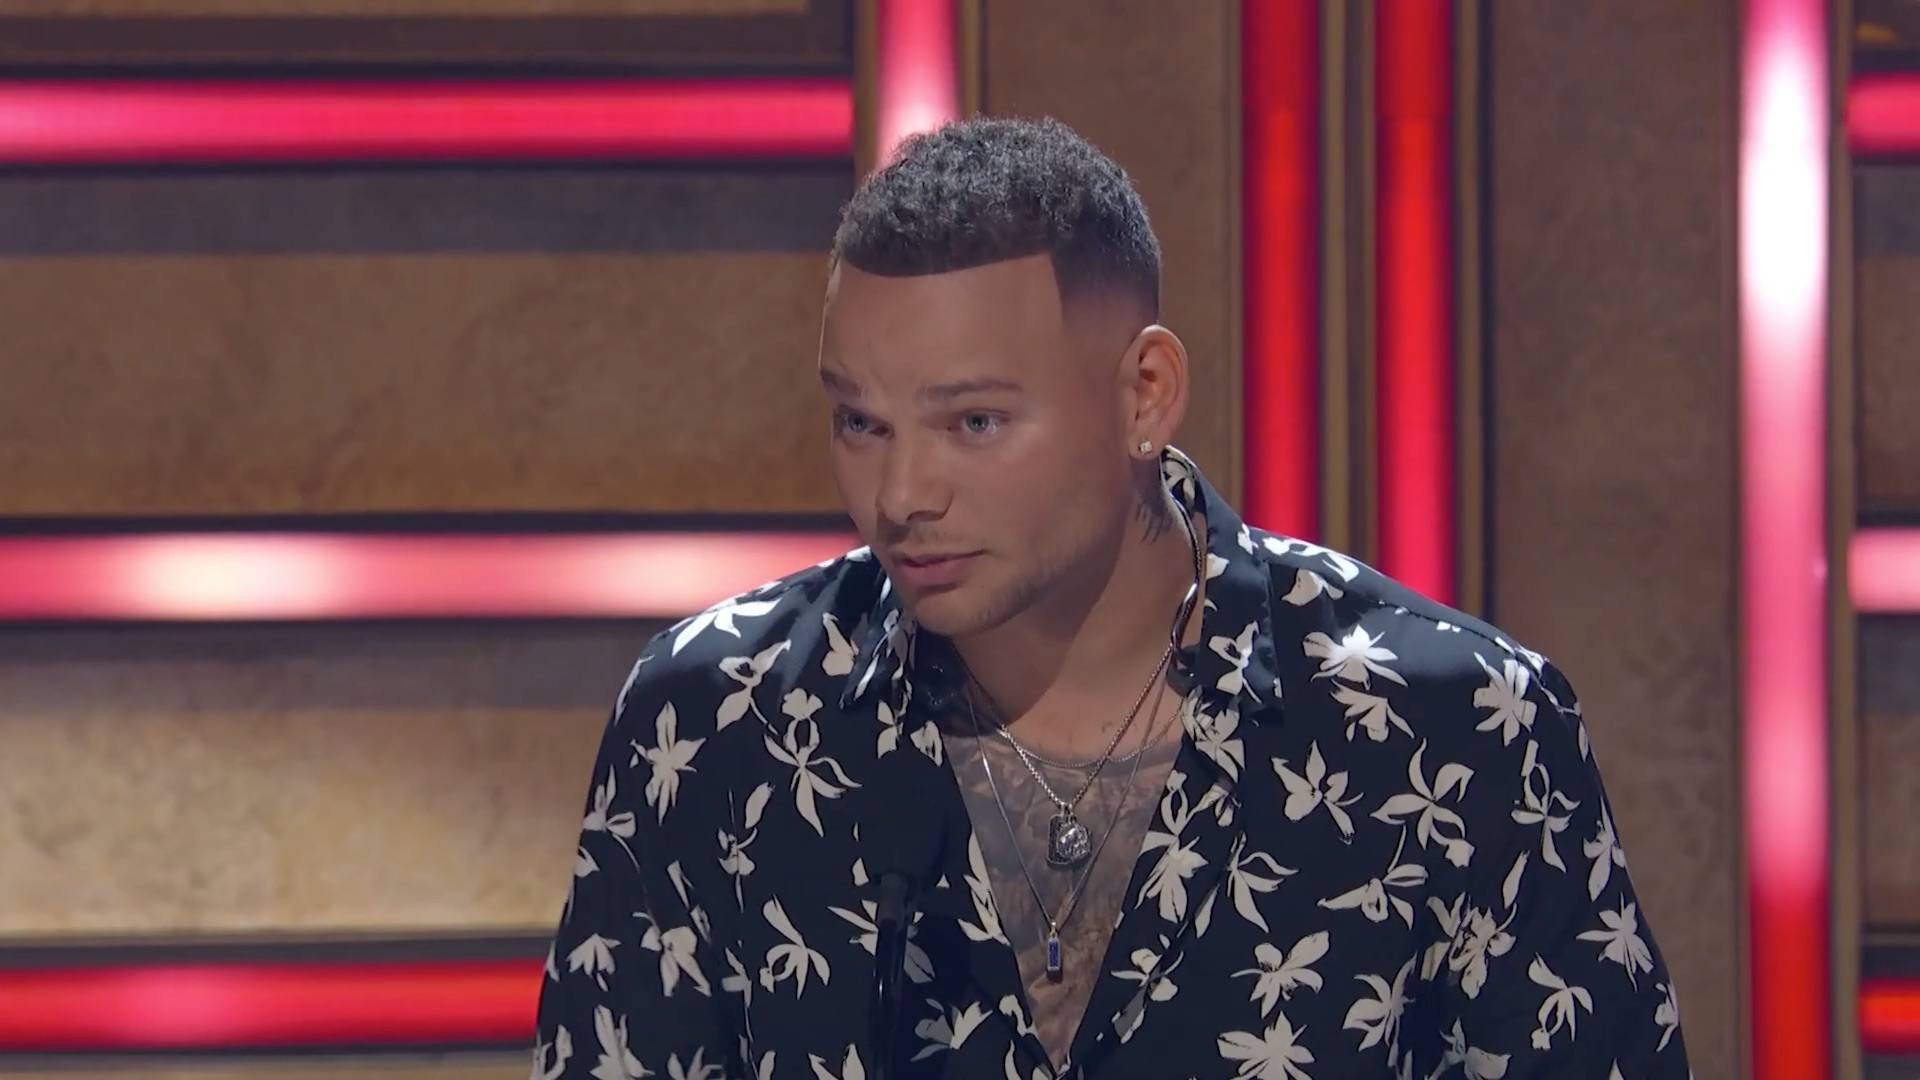 Kane Brown Receives His Artist of the Year Honor at CMT Artists of the Year 2021.